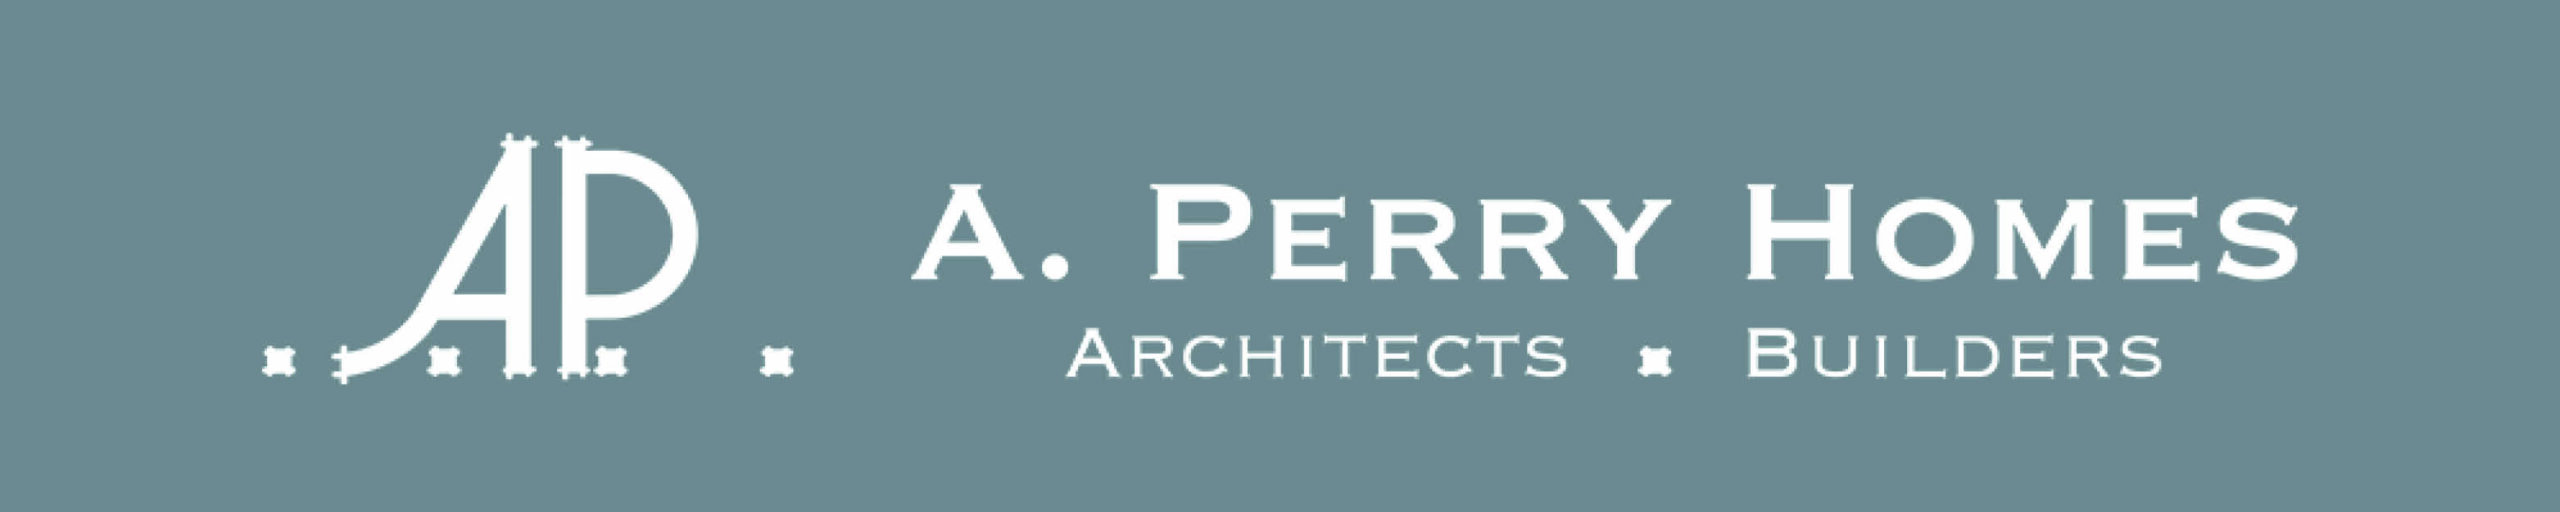 A. Perry Homes Ad